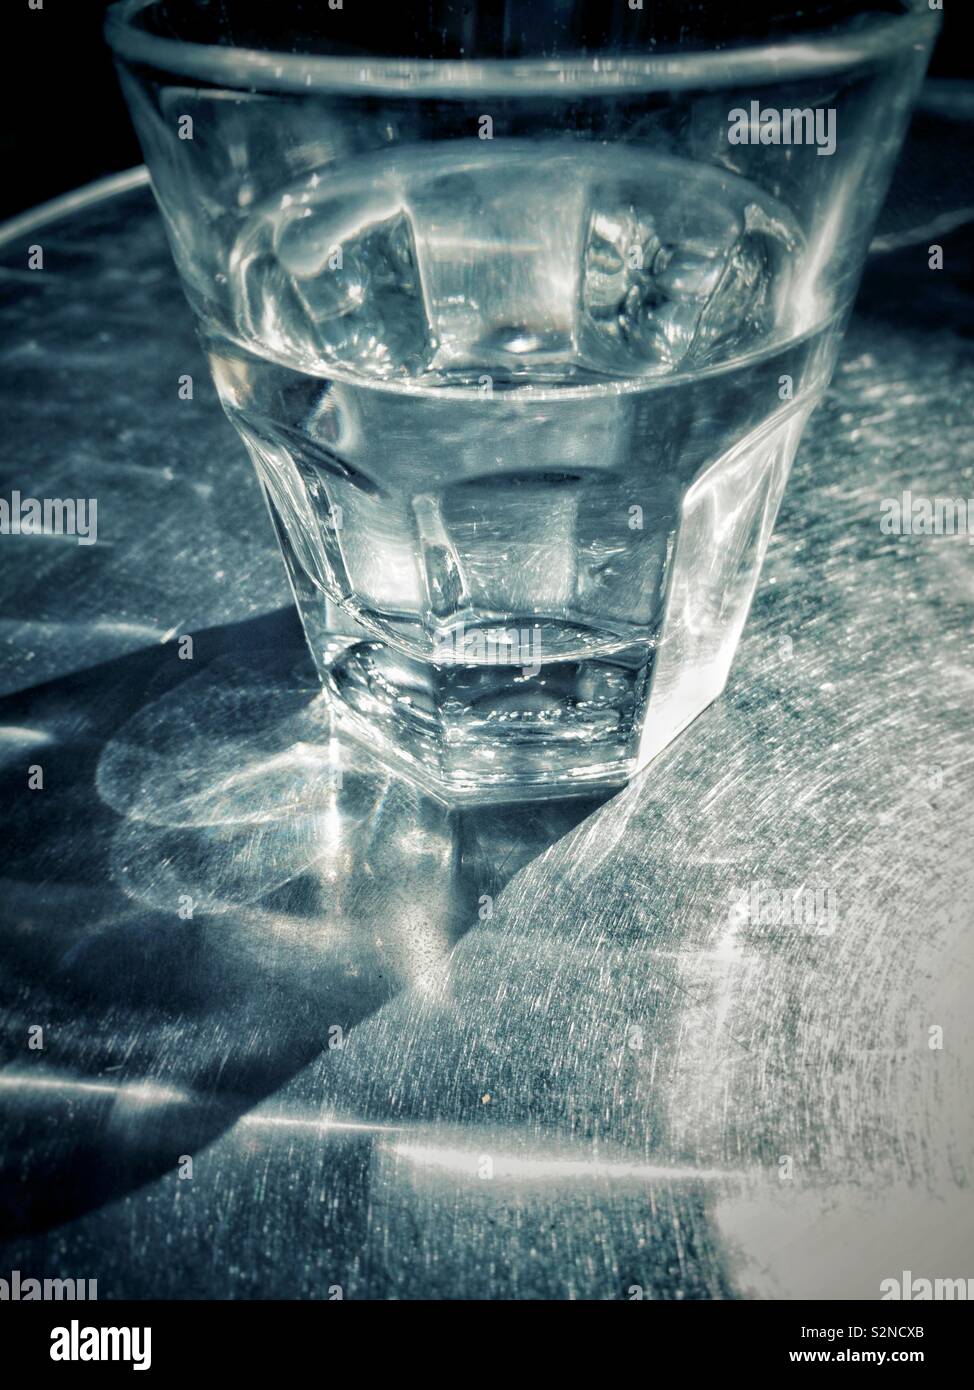 Clear partially full glass of water on metal patio table in bright sunshine in an outdoor urban setting. Stock Photo